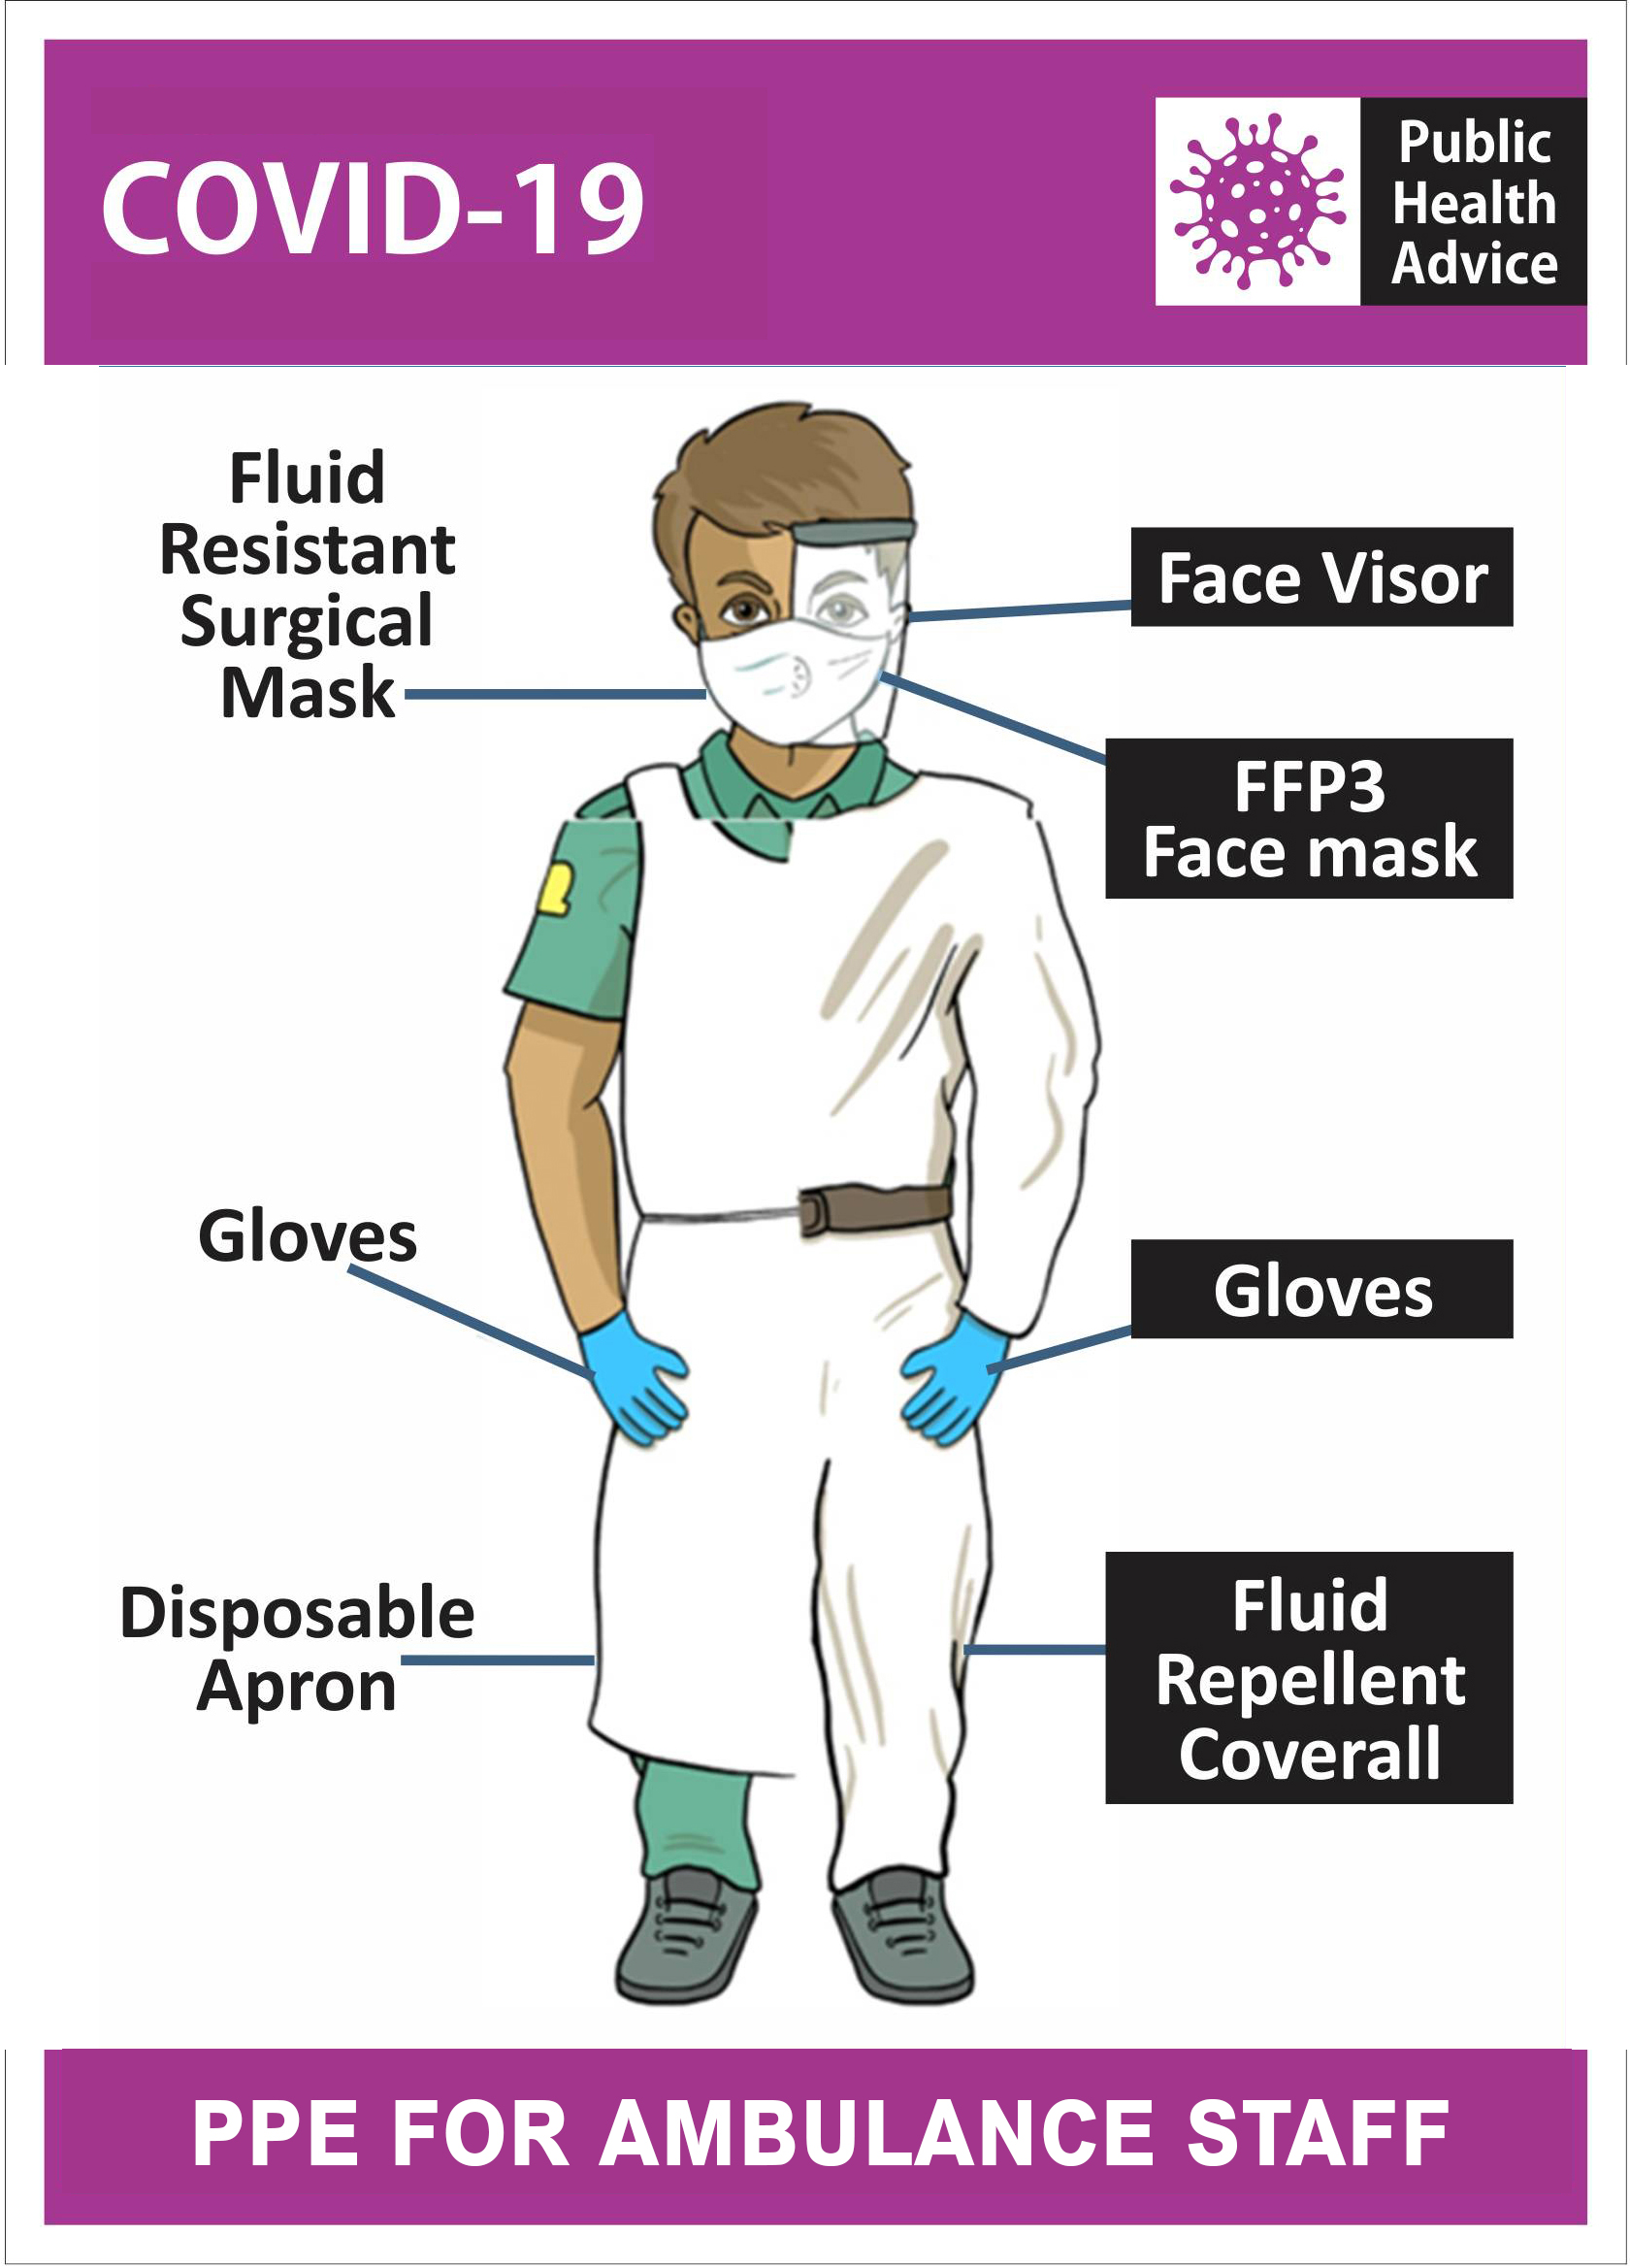 PPE FOR AMBULANCE STAFF